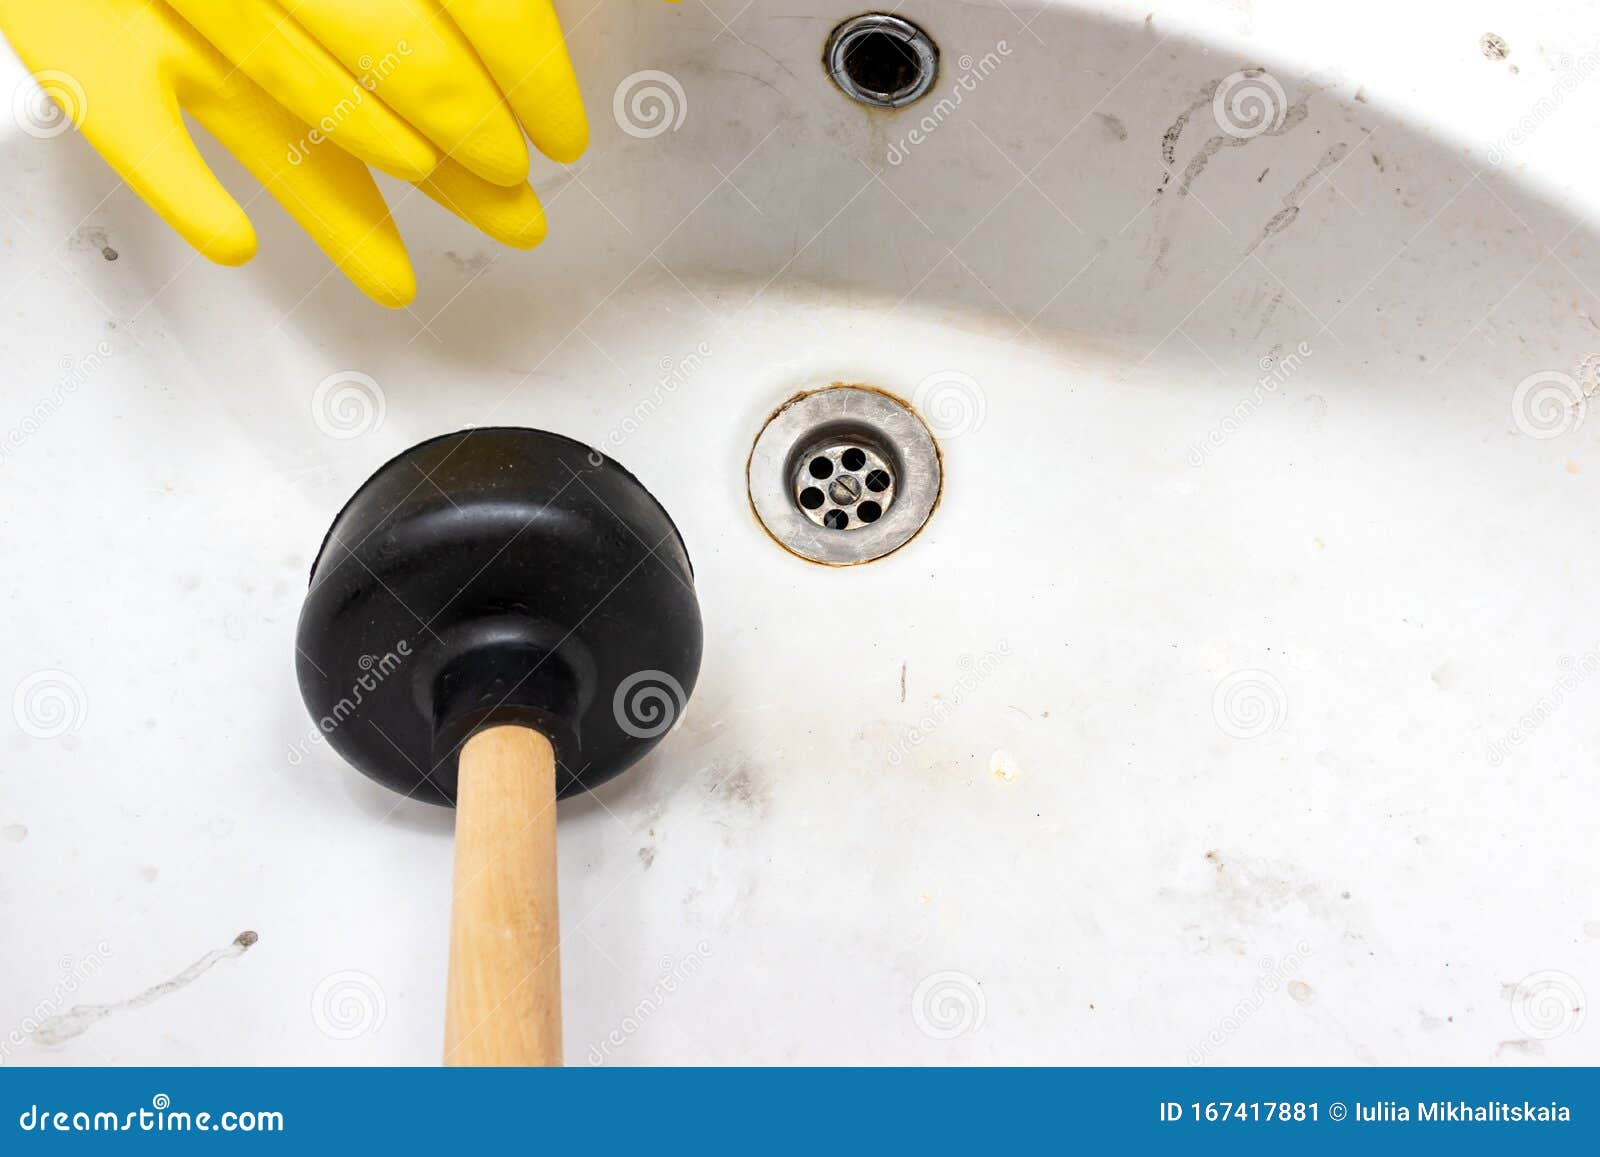 blocked sewer, clogged wash bowl, basin drain, yellow rubber gloves and a plunger near in the bathroom at home